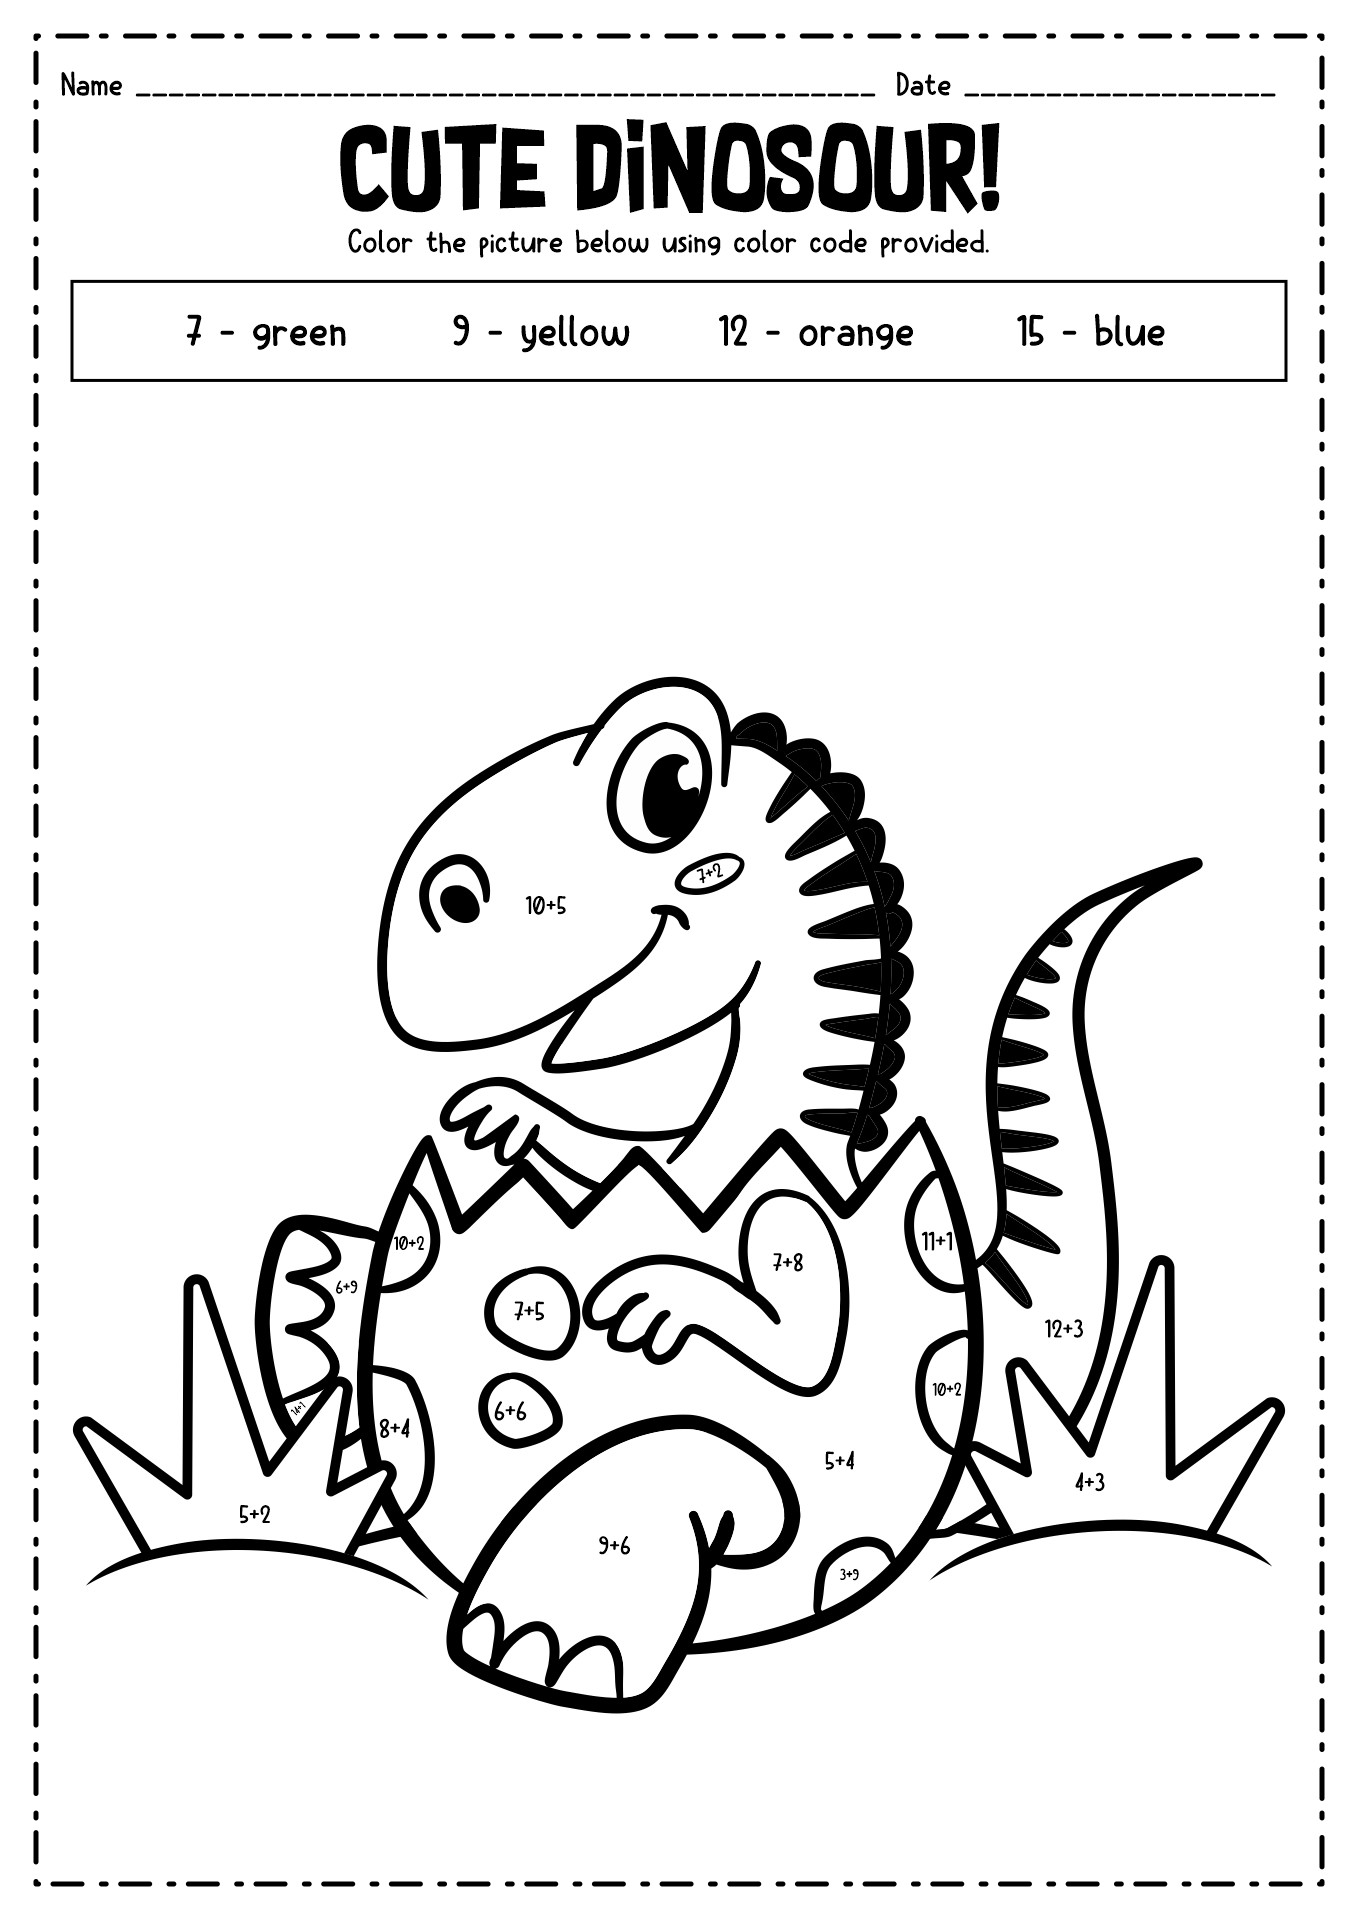 19 Best Images of Color Code Math Worksheets - Color by Code Math ...